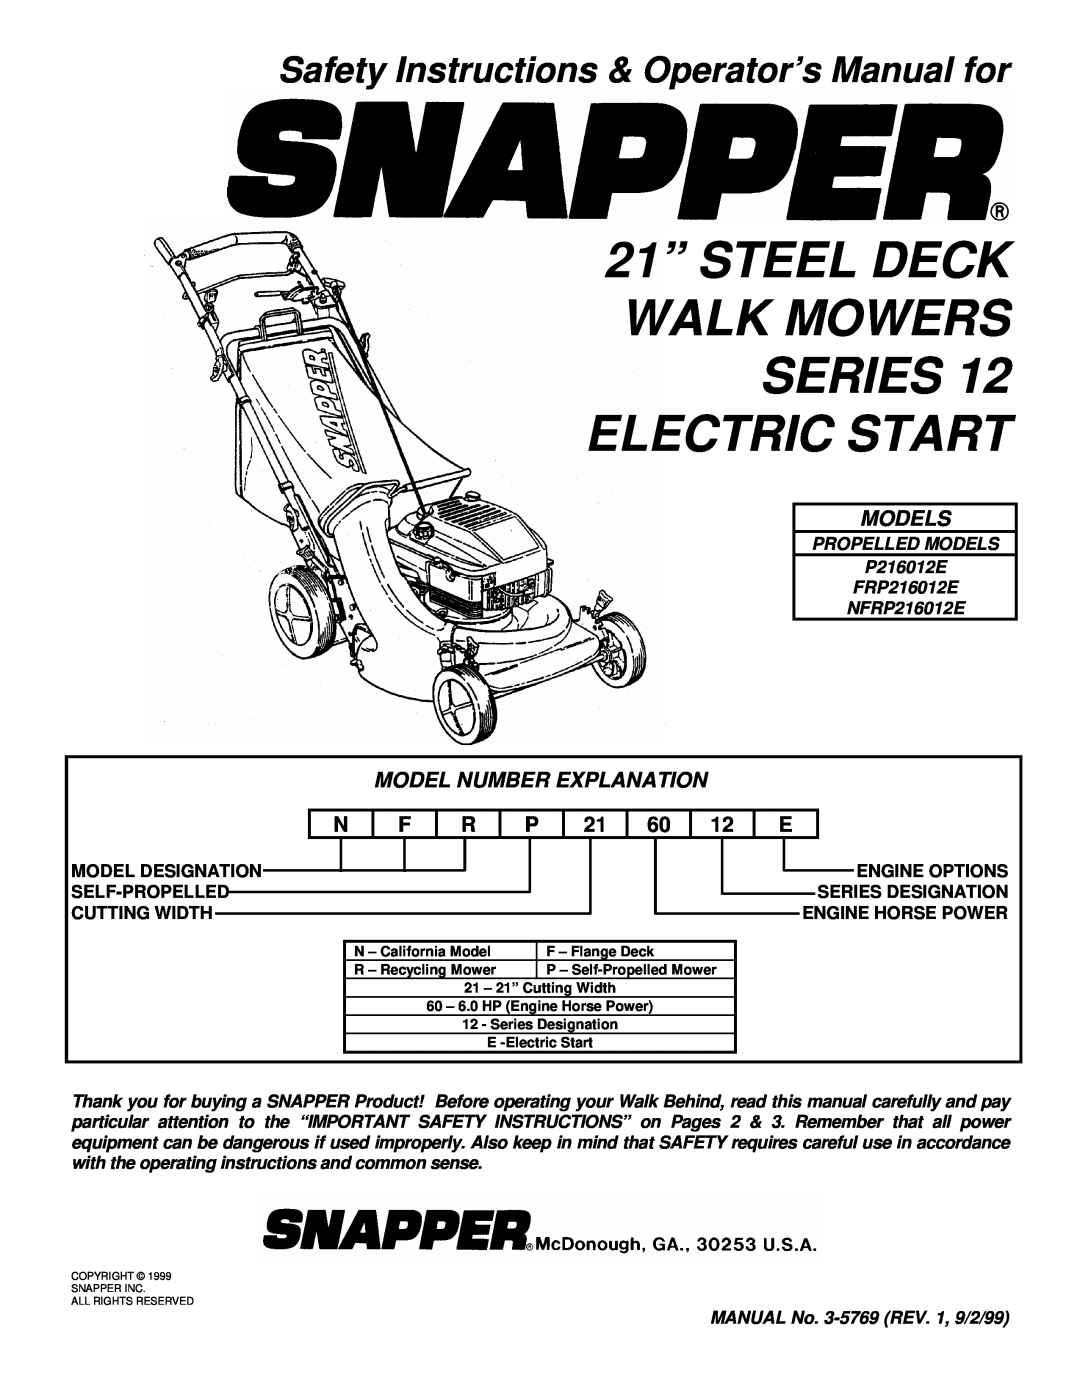 Snapper P216012E important safety instructions Safety Instructions & Operator’s Manual for, Models 